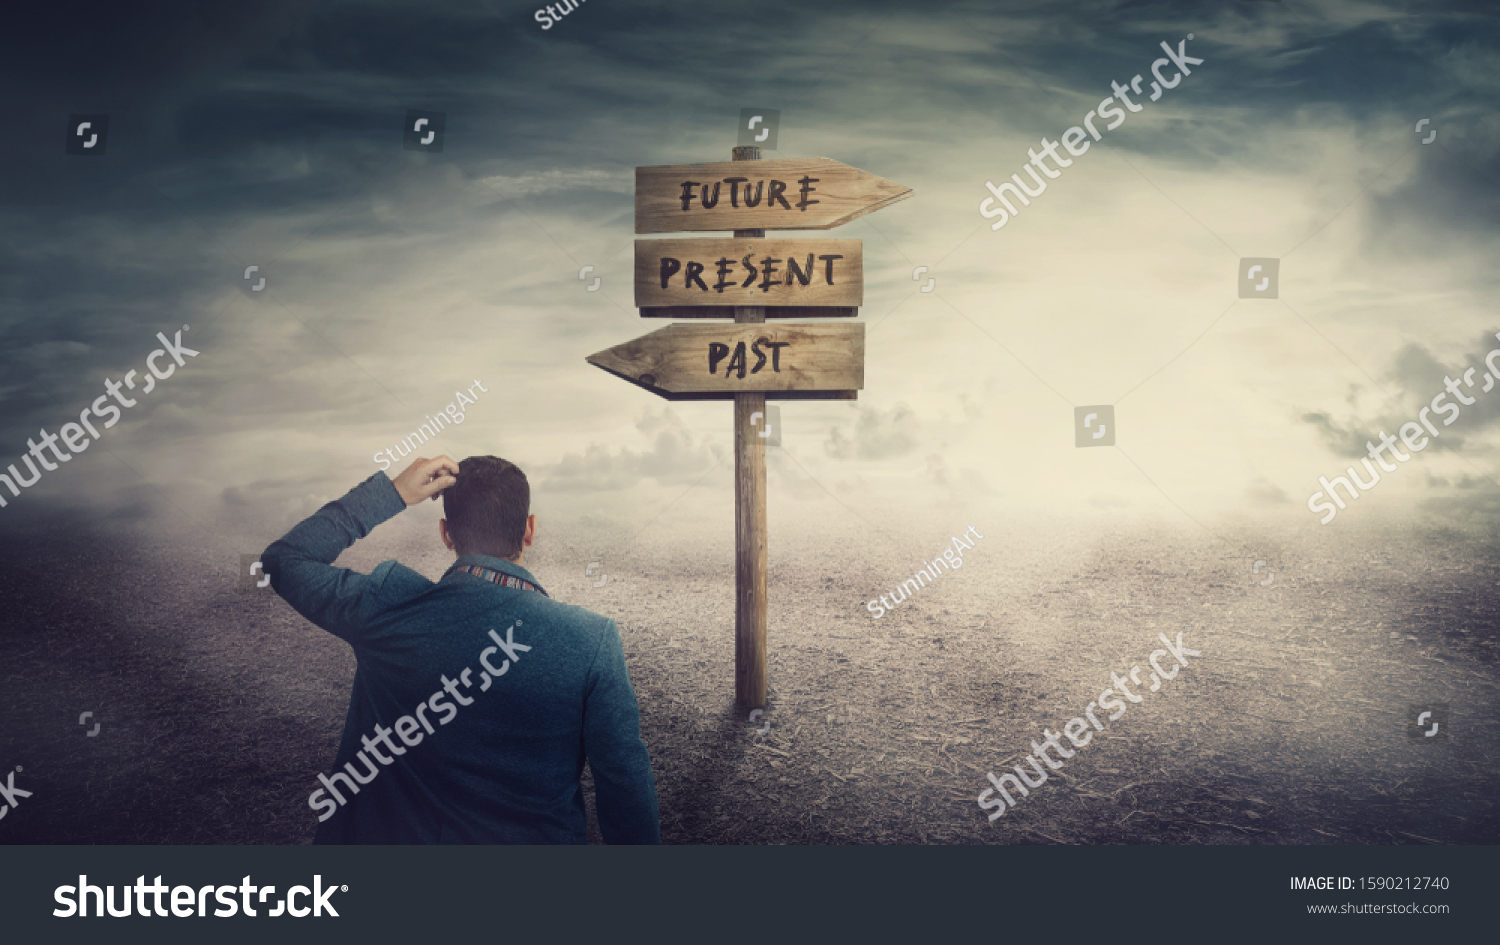 Surreal scene, businessman and a signpost arrows showing three different options, past, present and future course. Choose journey direction, time travel concept. Destiny evolution, important choice. #1590212740